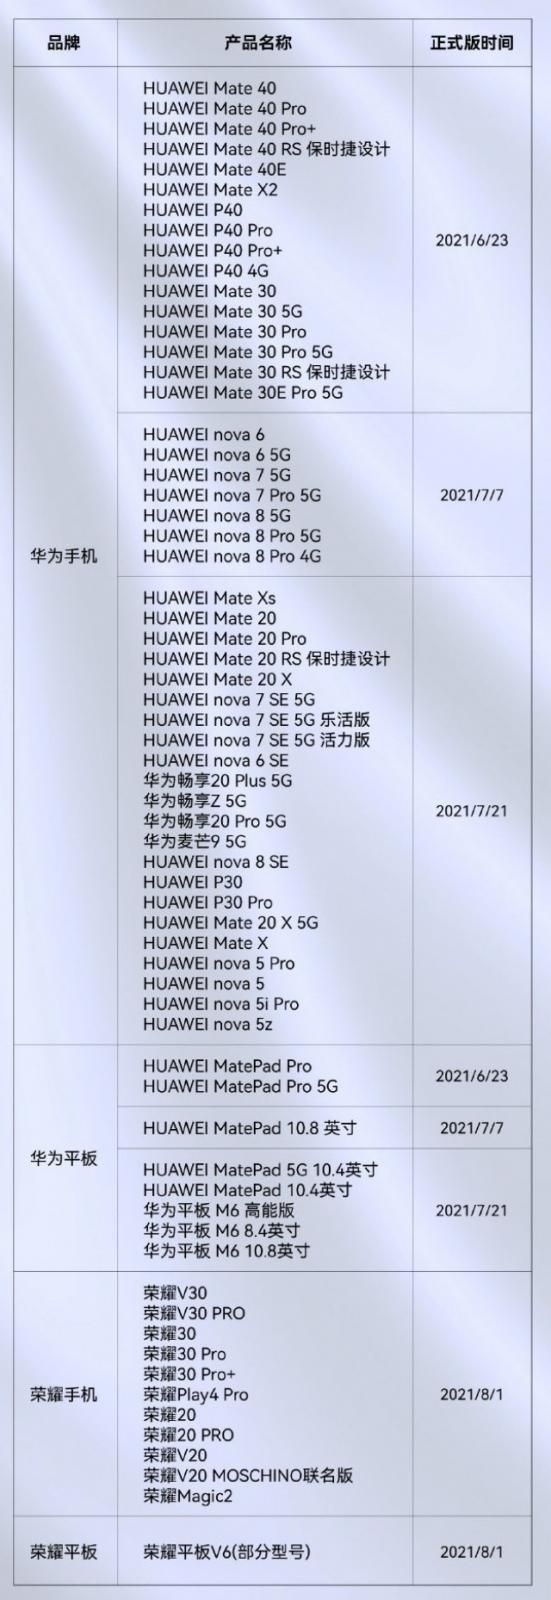 List of Huawei and Honor devices receiving HarmonyOS